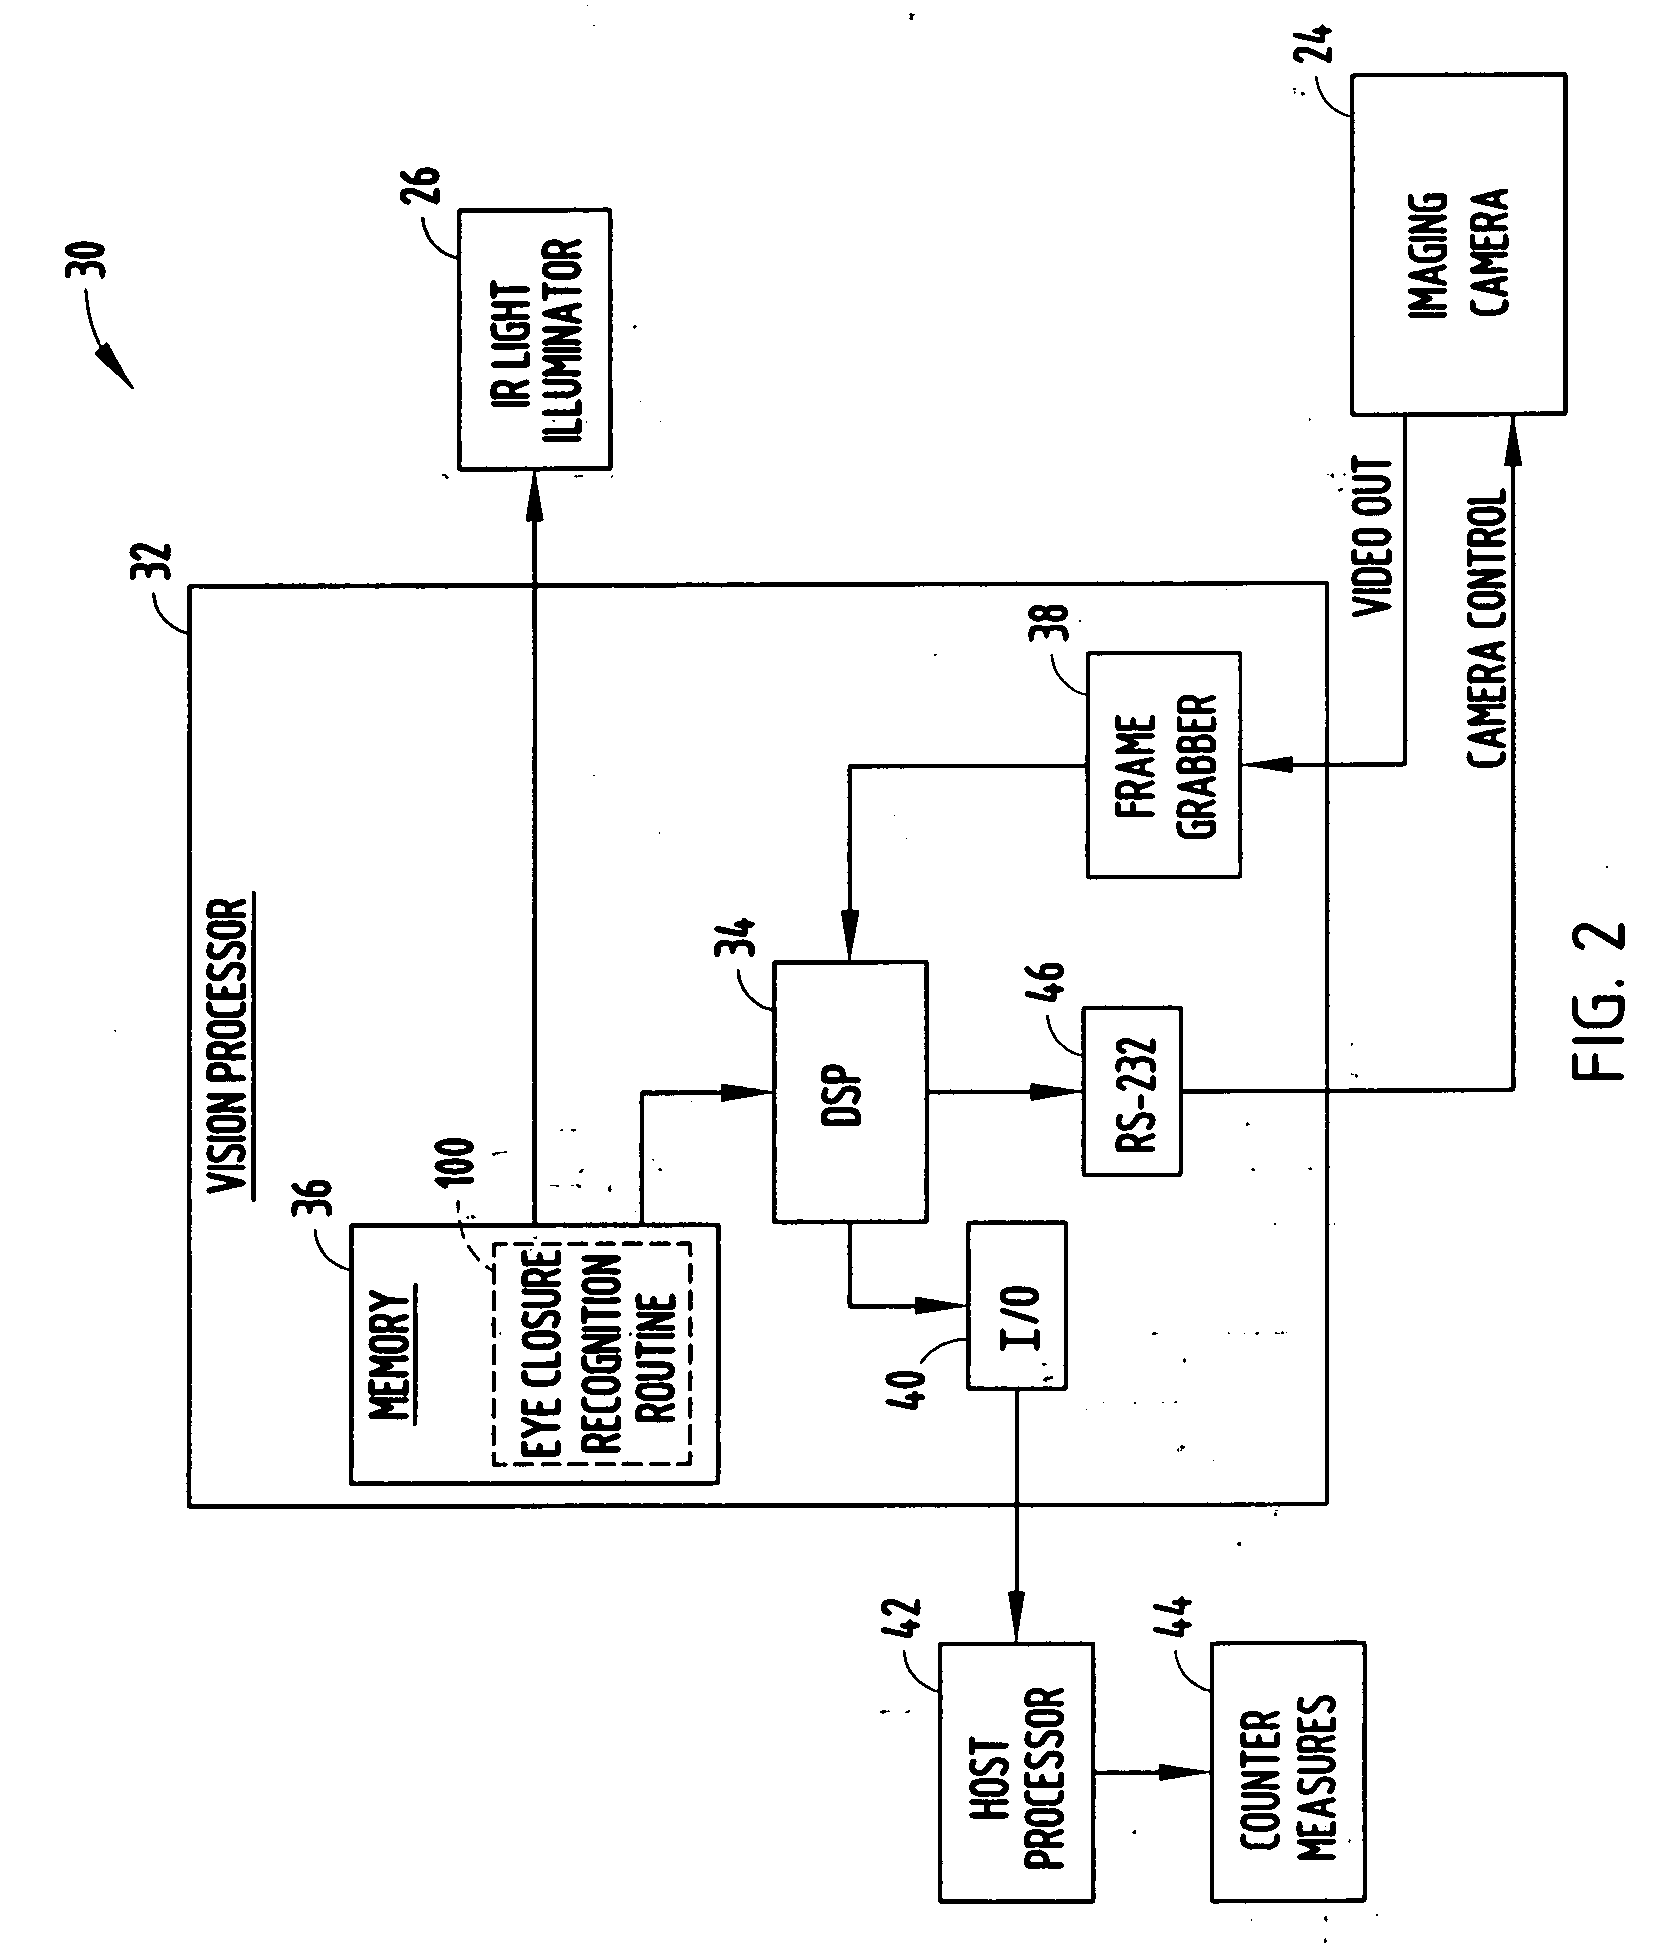 System and method of detecting eye closure based on edge lines